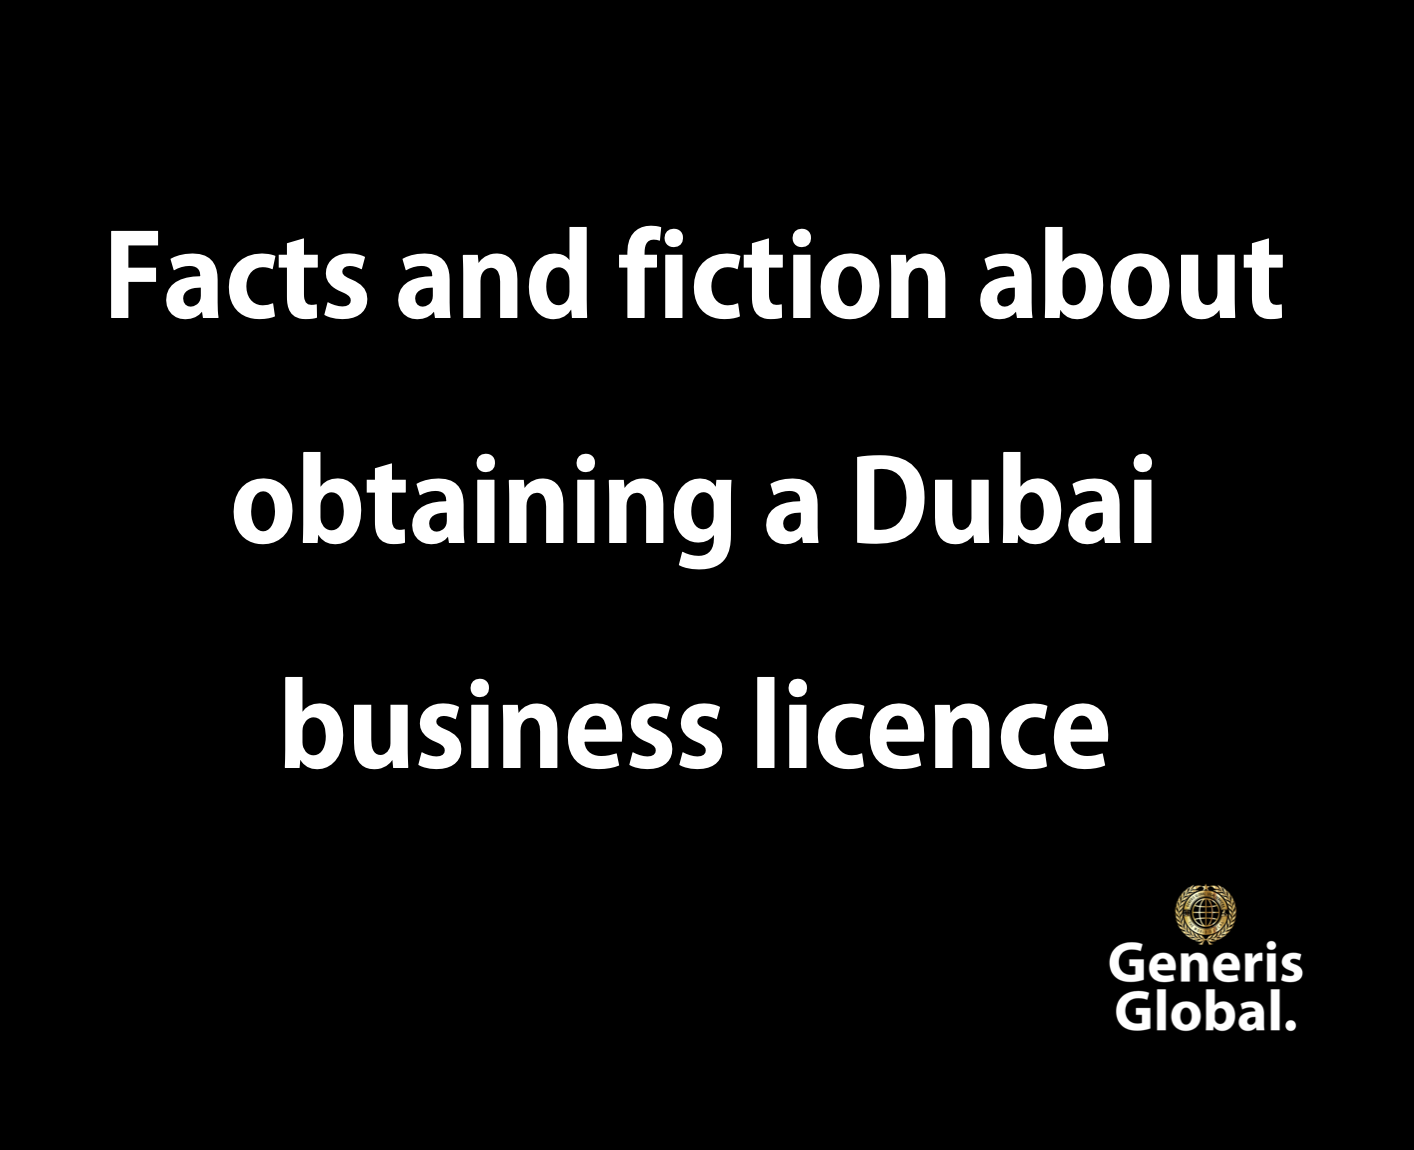 Facts and fiction about obtaining a Dubai business licence